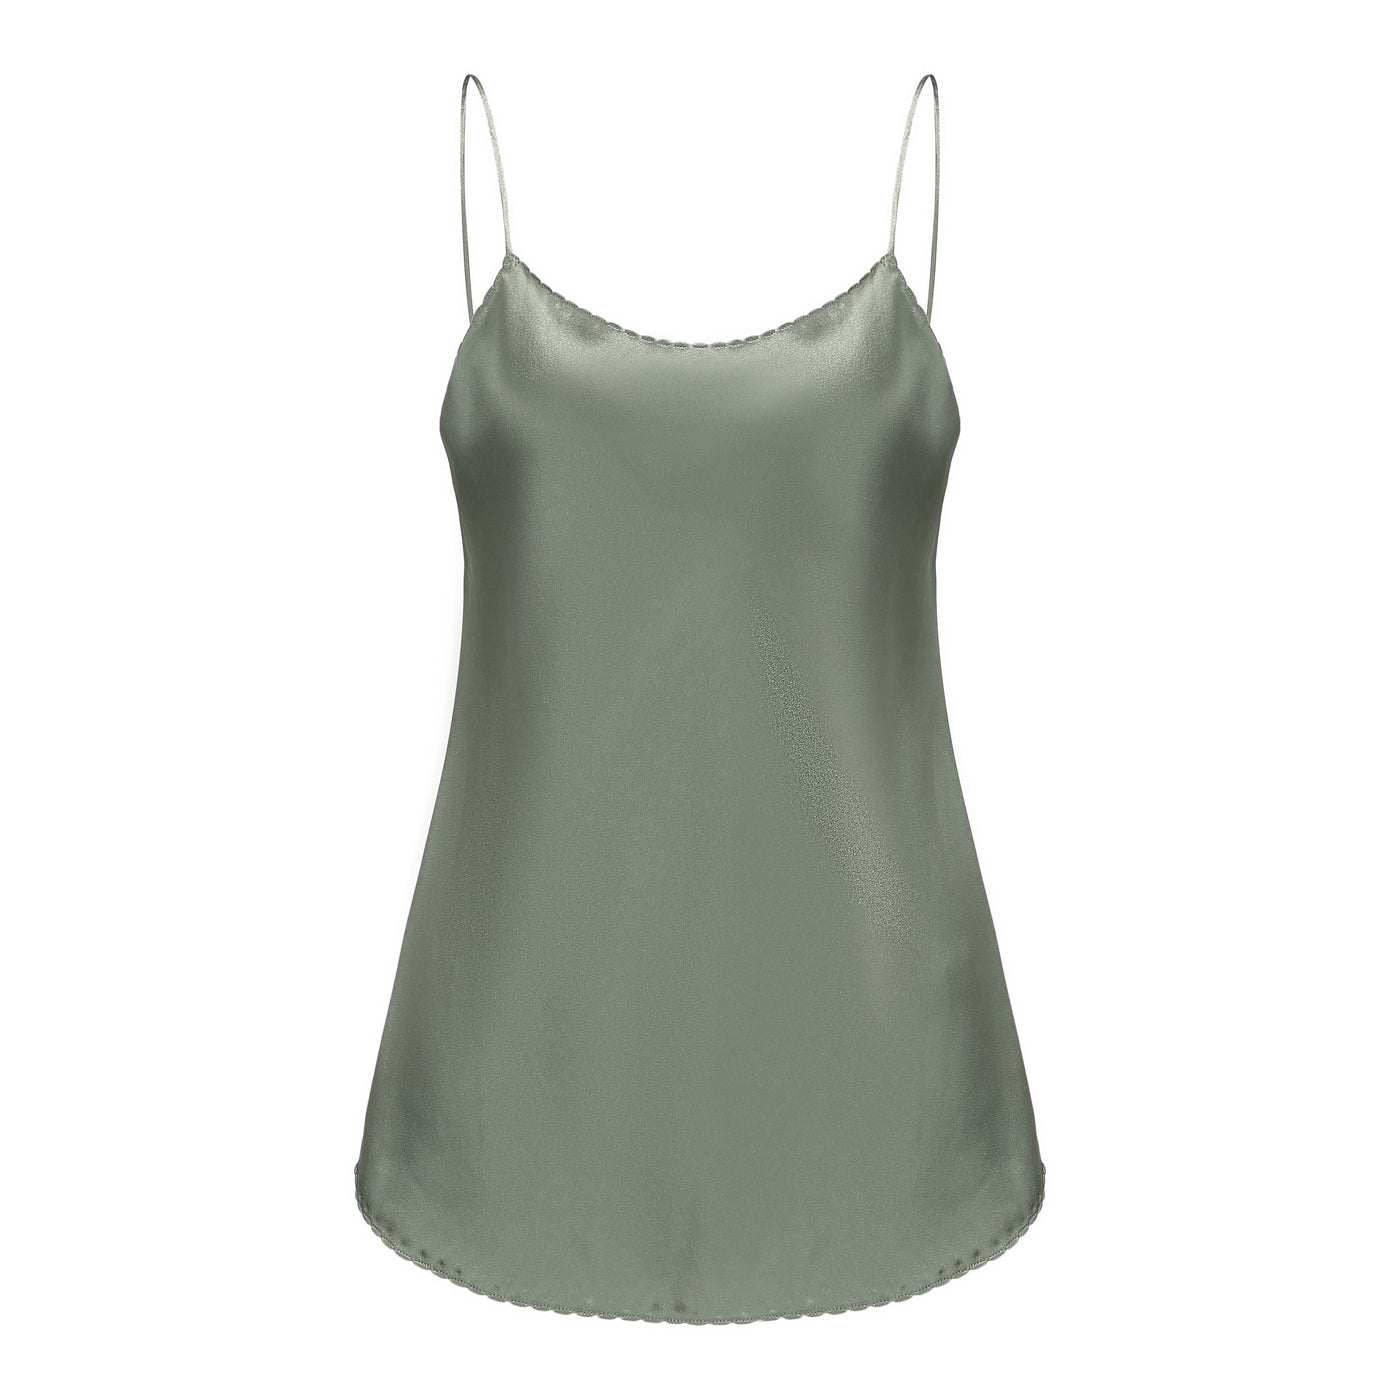 Lilly Pilly Collection bluesign® certified silk Eva Cami in Khaki as 3D image showing front view